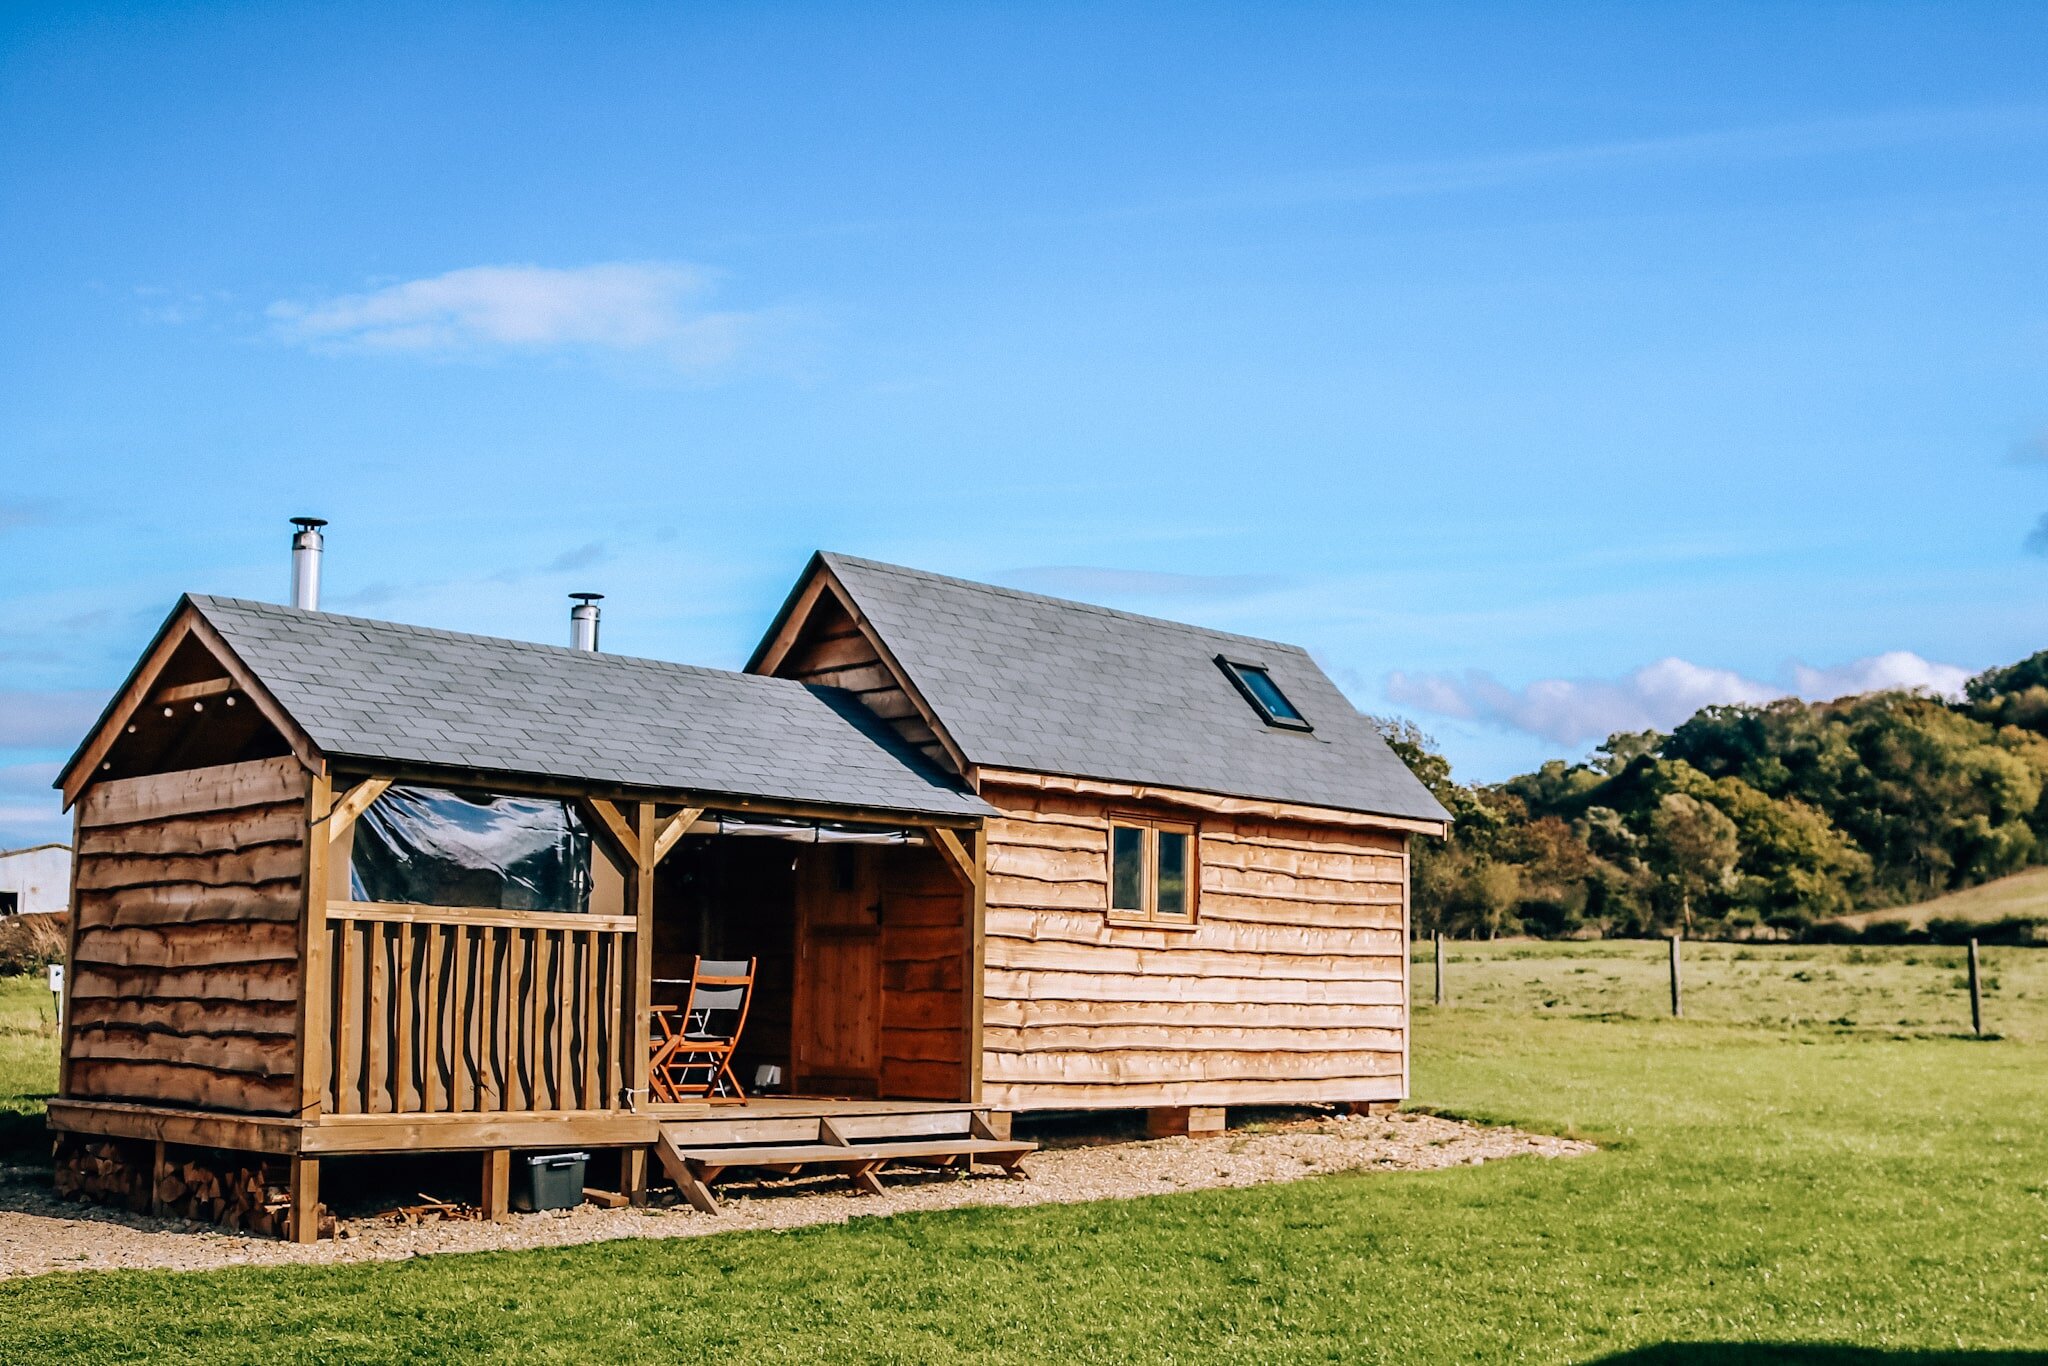 6 Unique places to stay for secluded UK getaways | Helena Bradbury travel blog | secluded places to stay UK | remote weekend breaks UK | remote retreats UK | secluded log cabins with hot tubs UK | secluded holidays UK | secluded breaks UK | remote g…